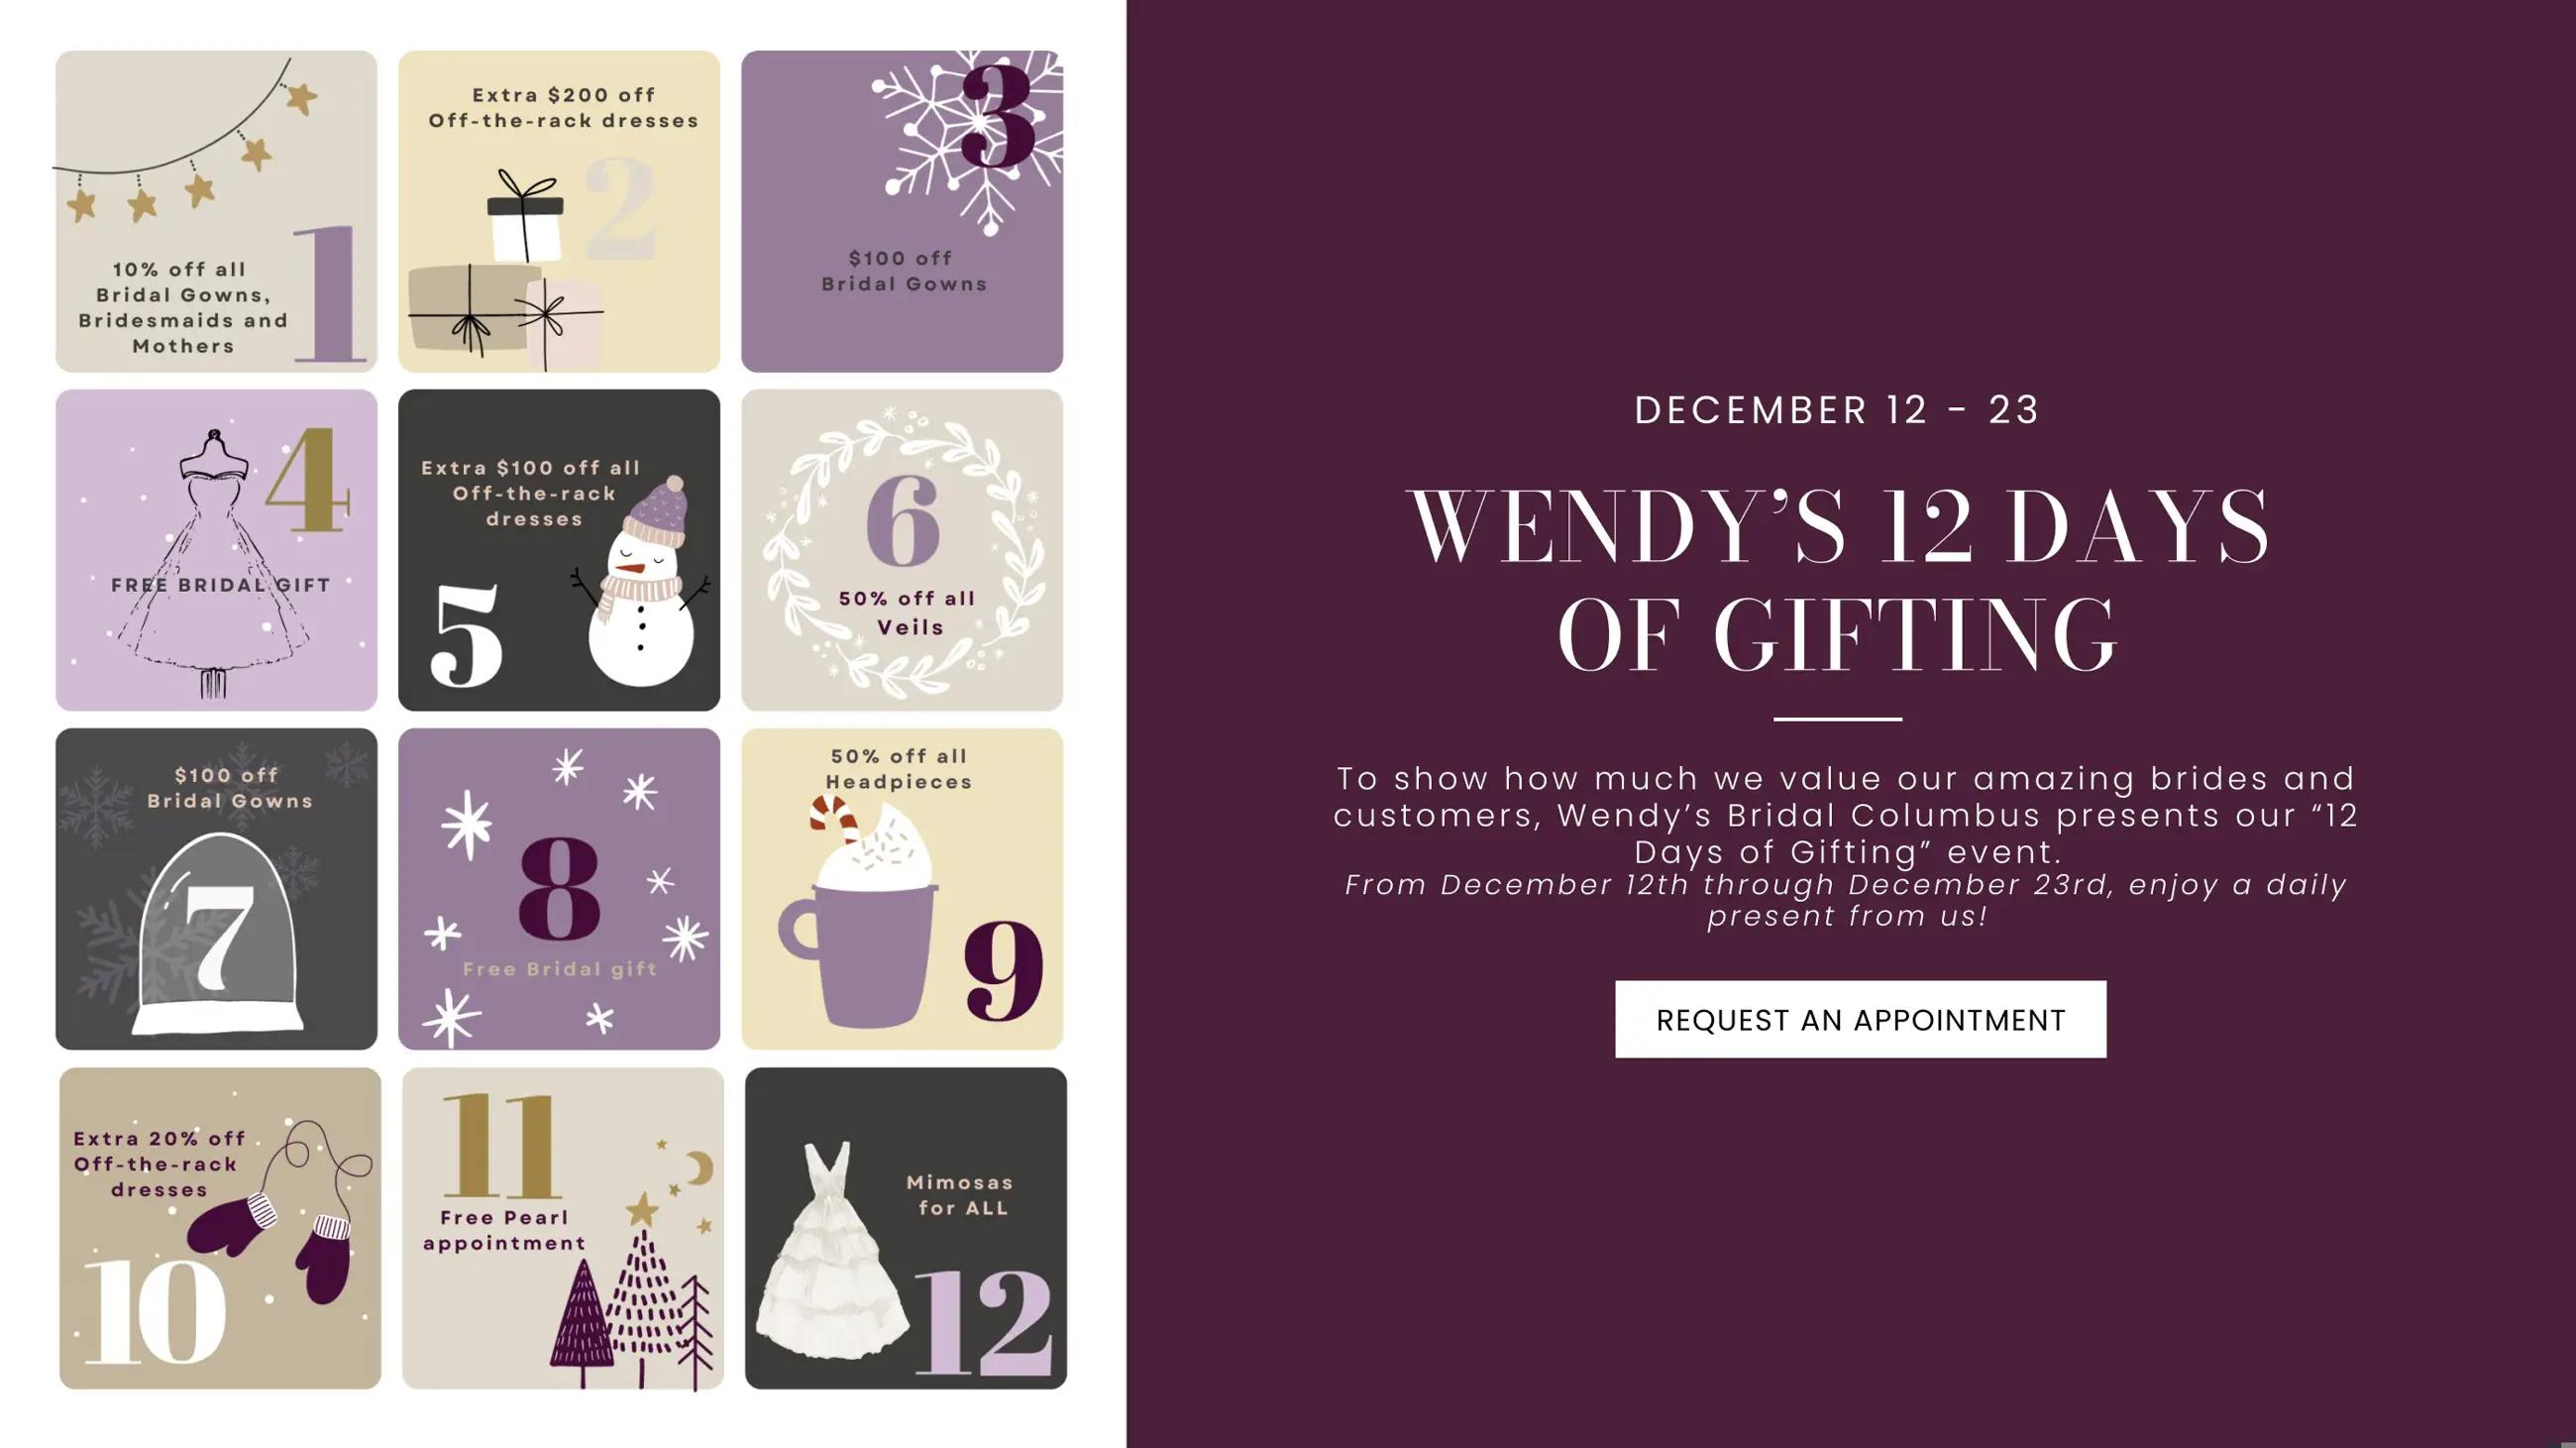 Wendy's 12 Days of Gifting at Wendy's Bridal in Columbus, OH